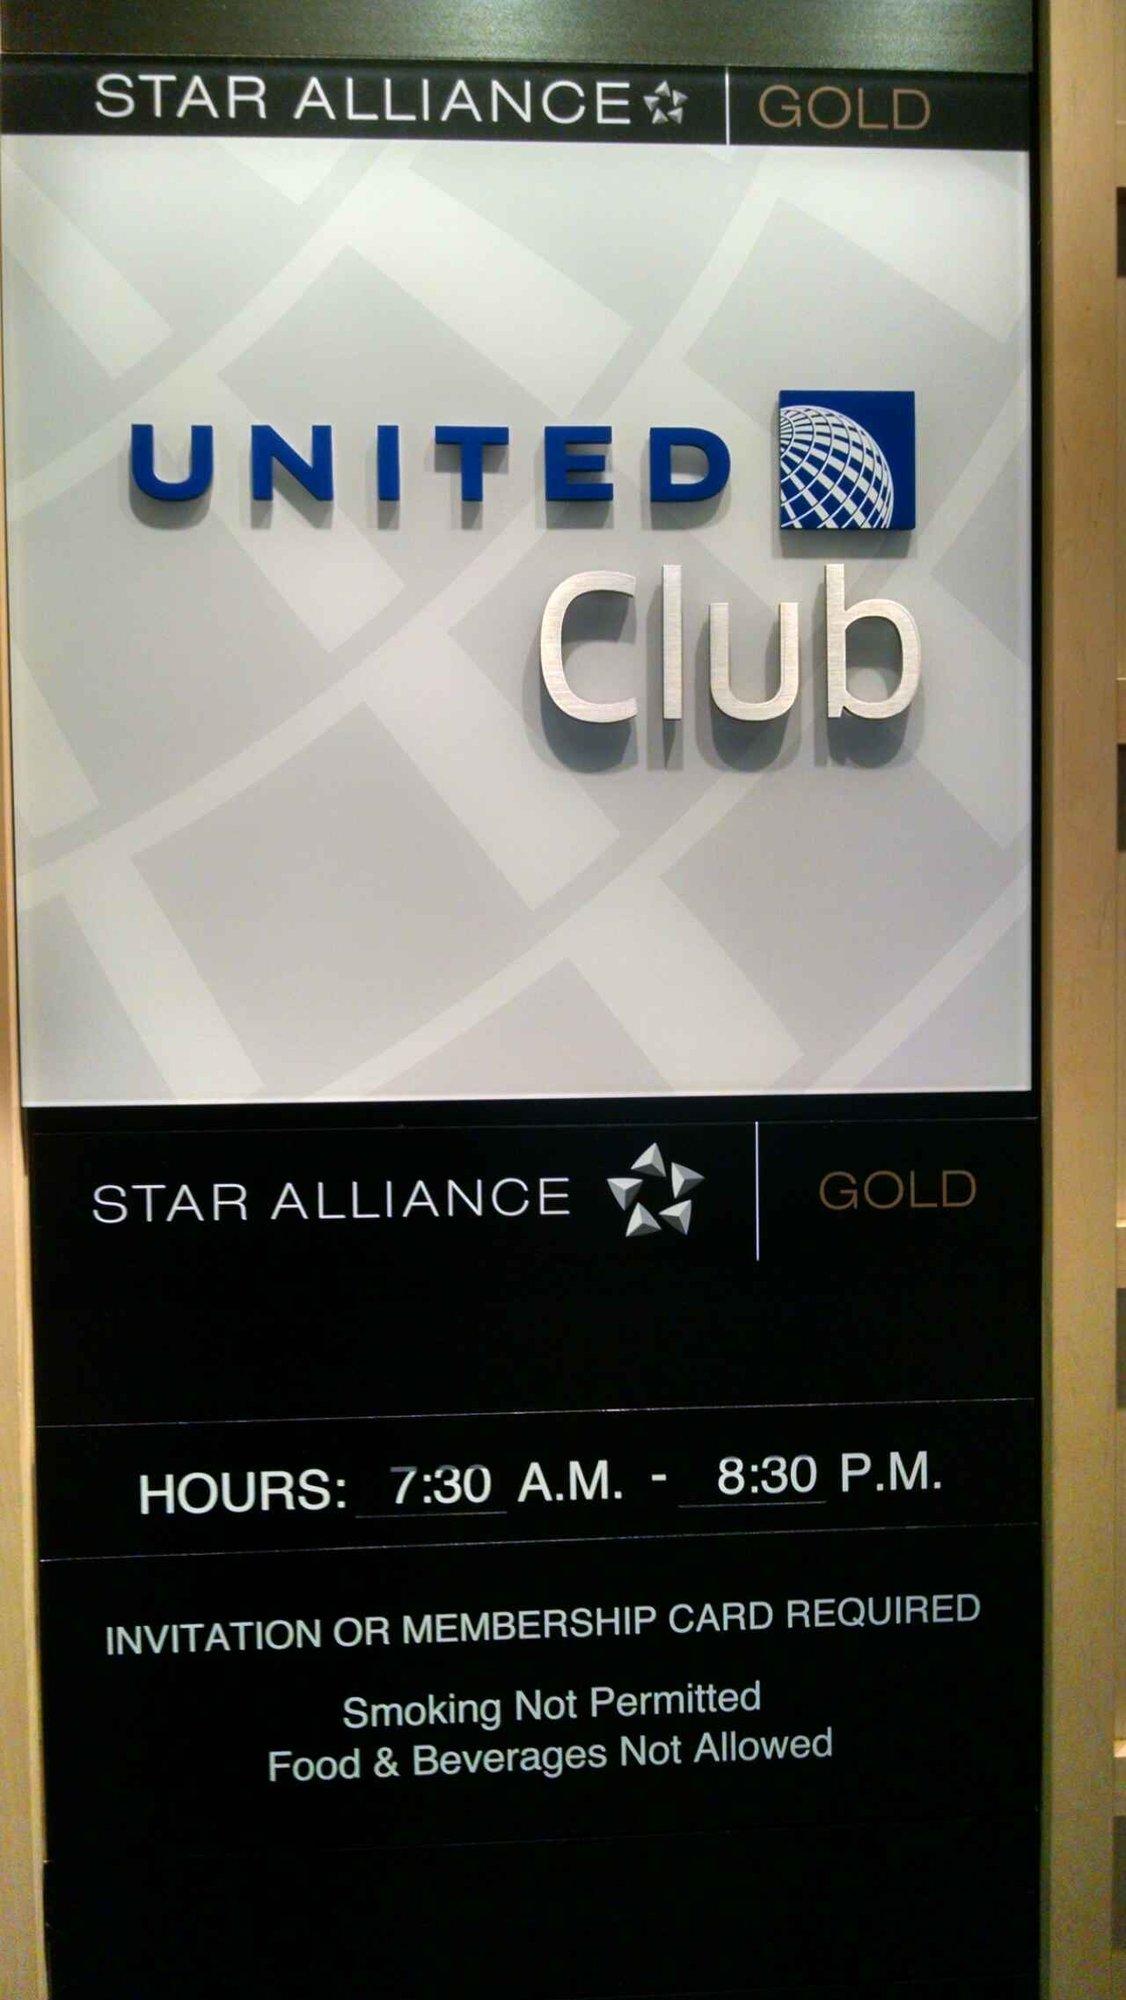 United Airlines United Club image 19 of 52